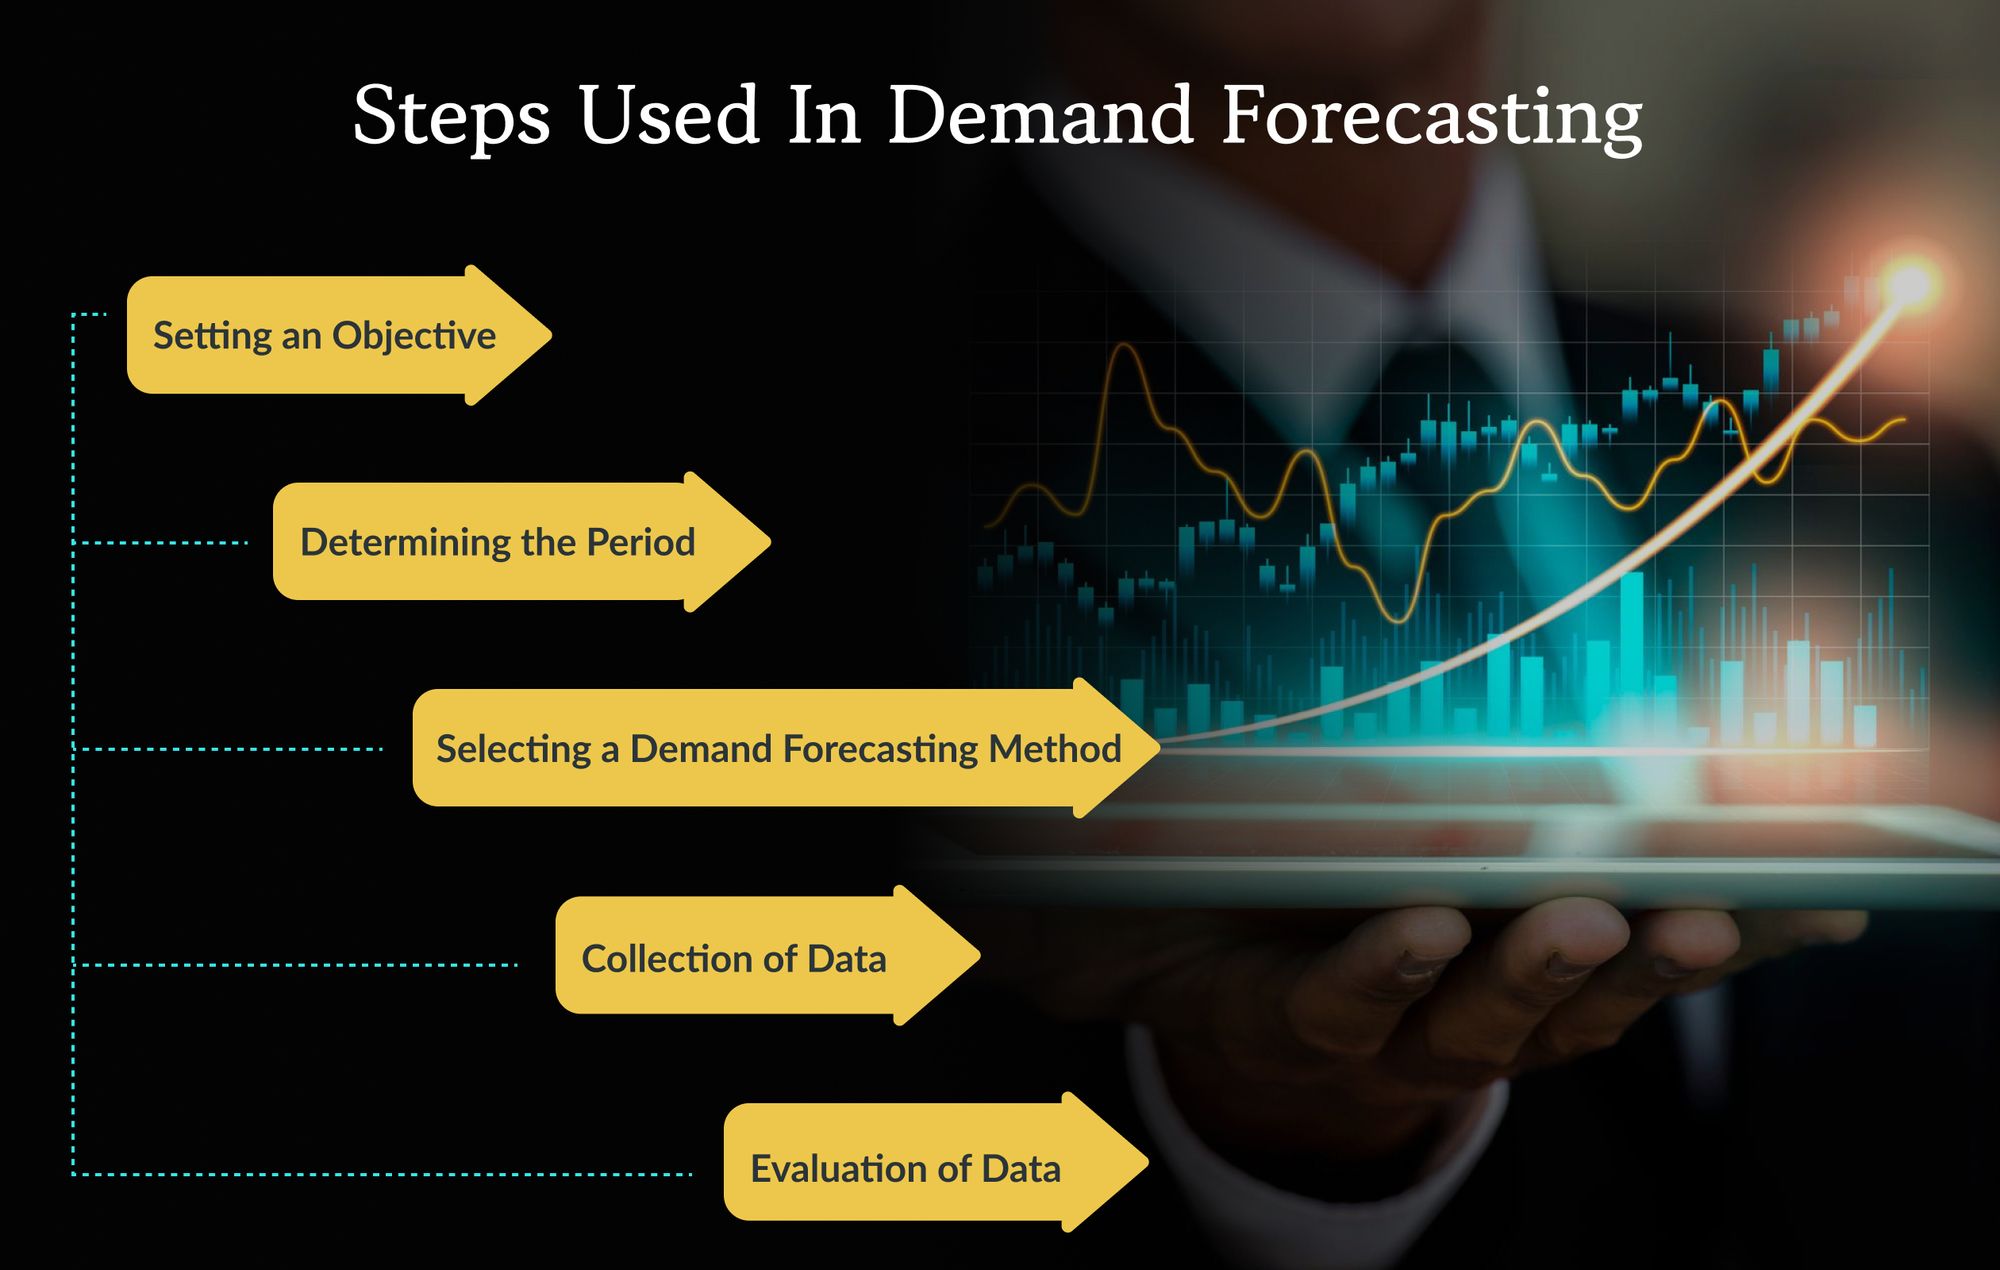 Steps Used in Demand Forecasting